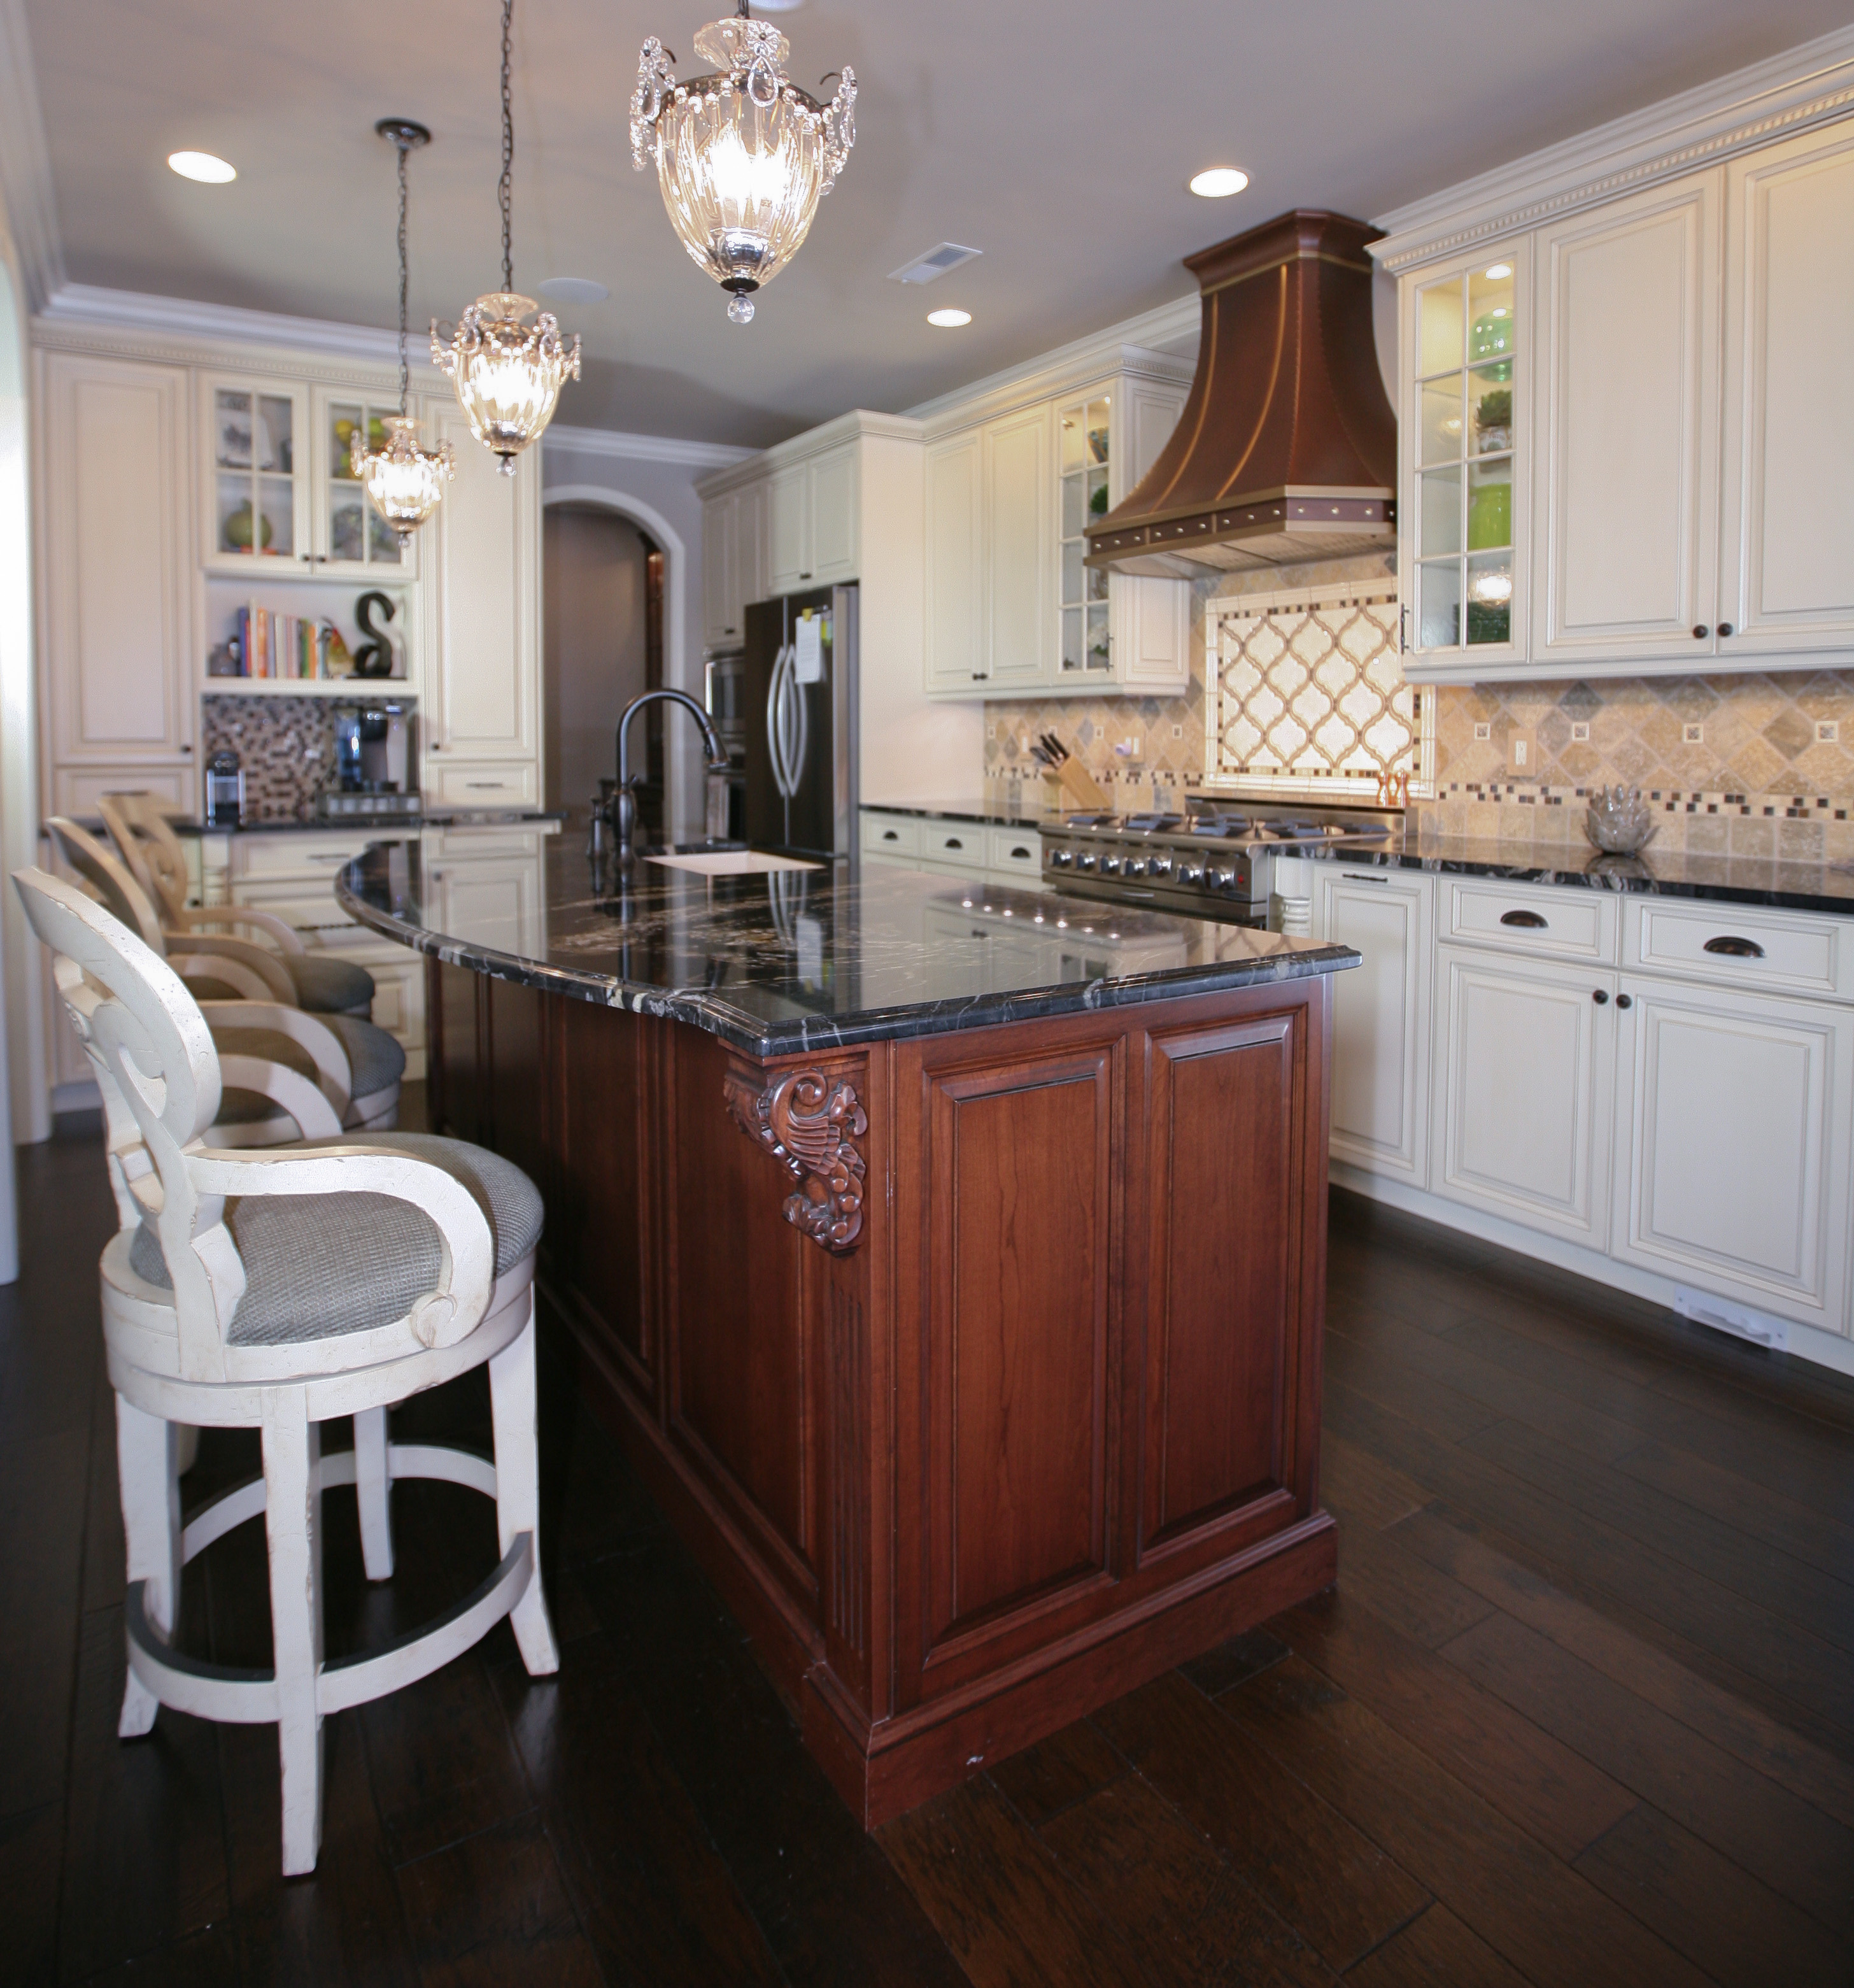 Top Rated Kitchen Farmingdale New Jersey by Design Line Kitchens